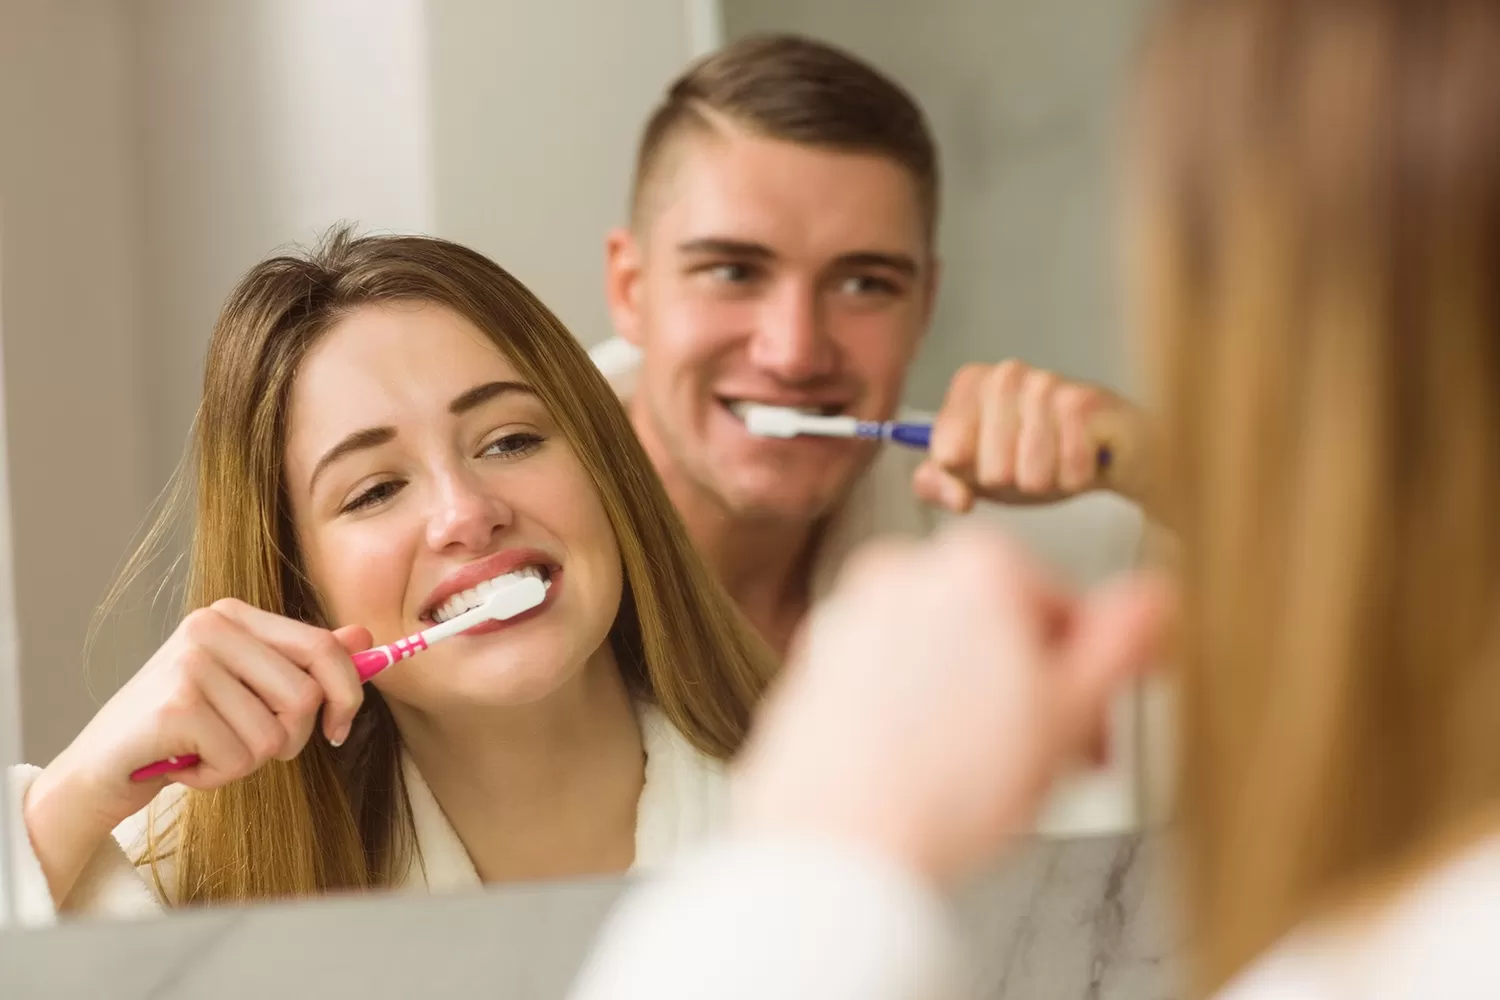 Brushing Teeth After Every Meal May Not Be Ideal